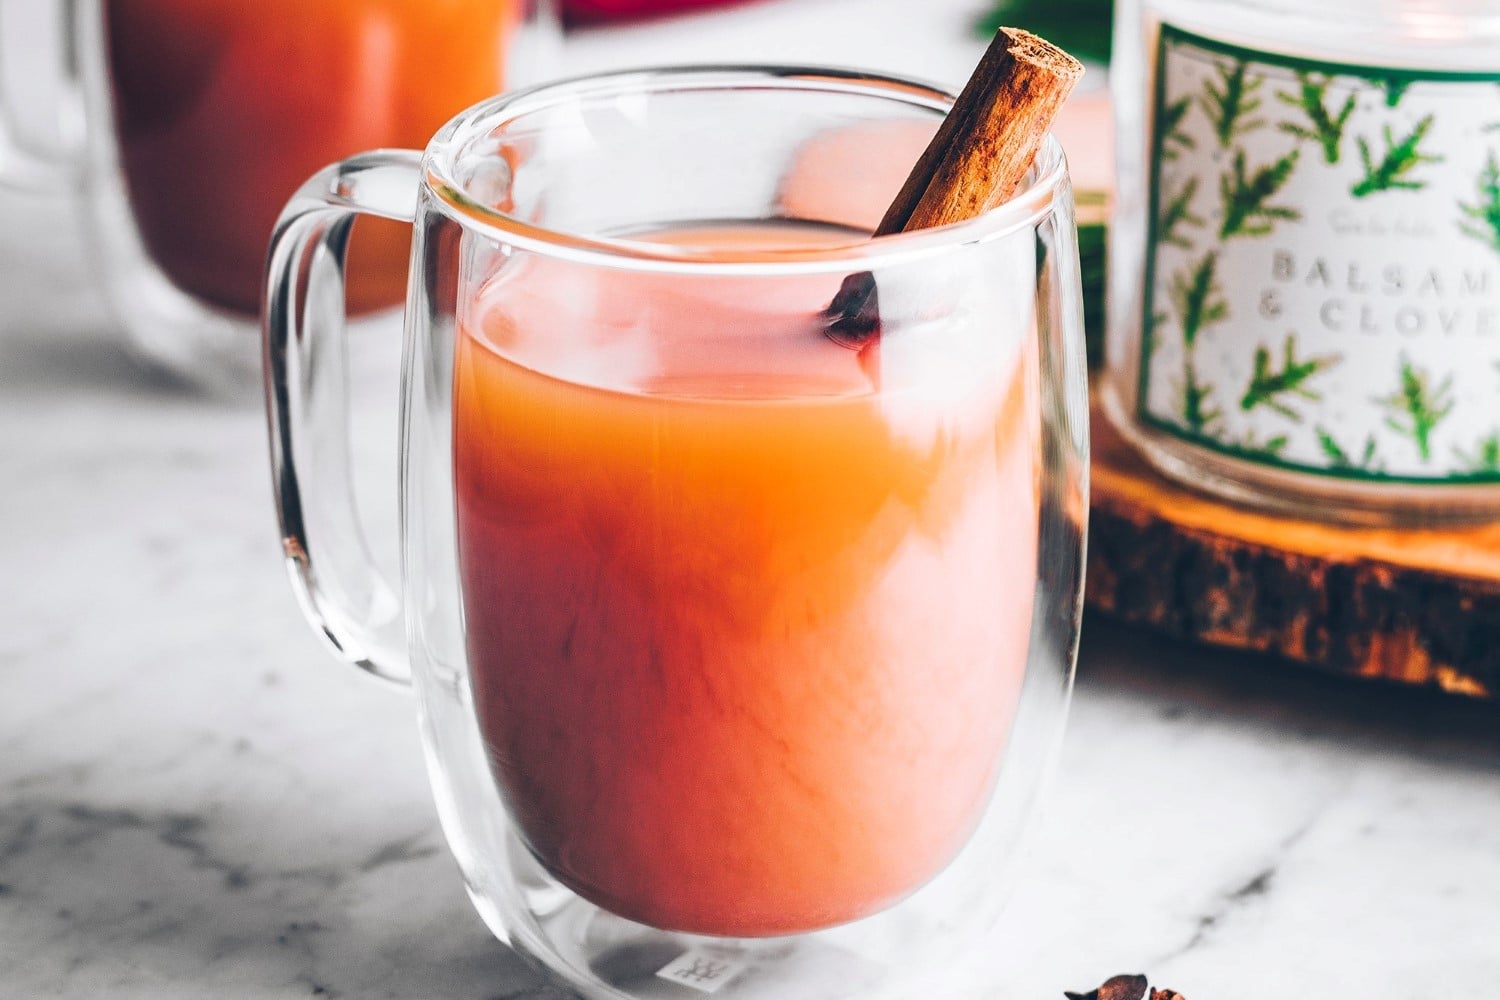 Get the Mulled Apple Cider recipe